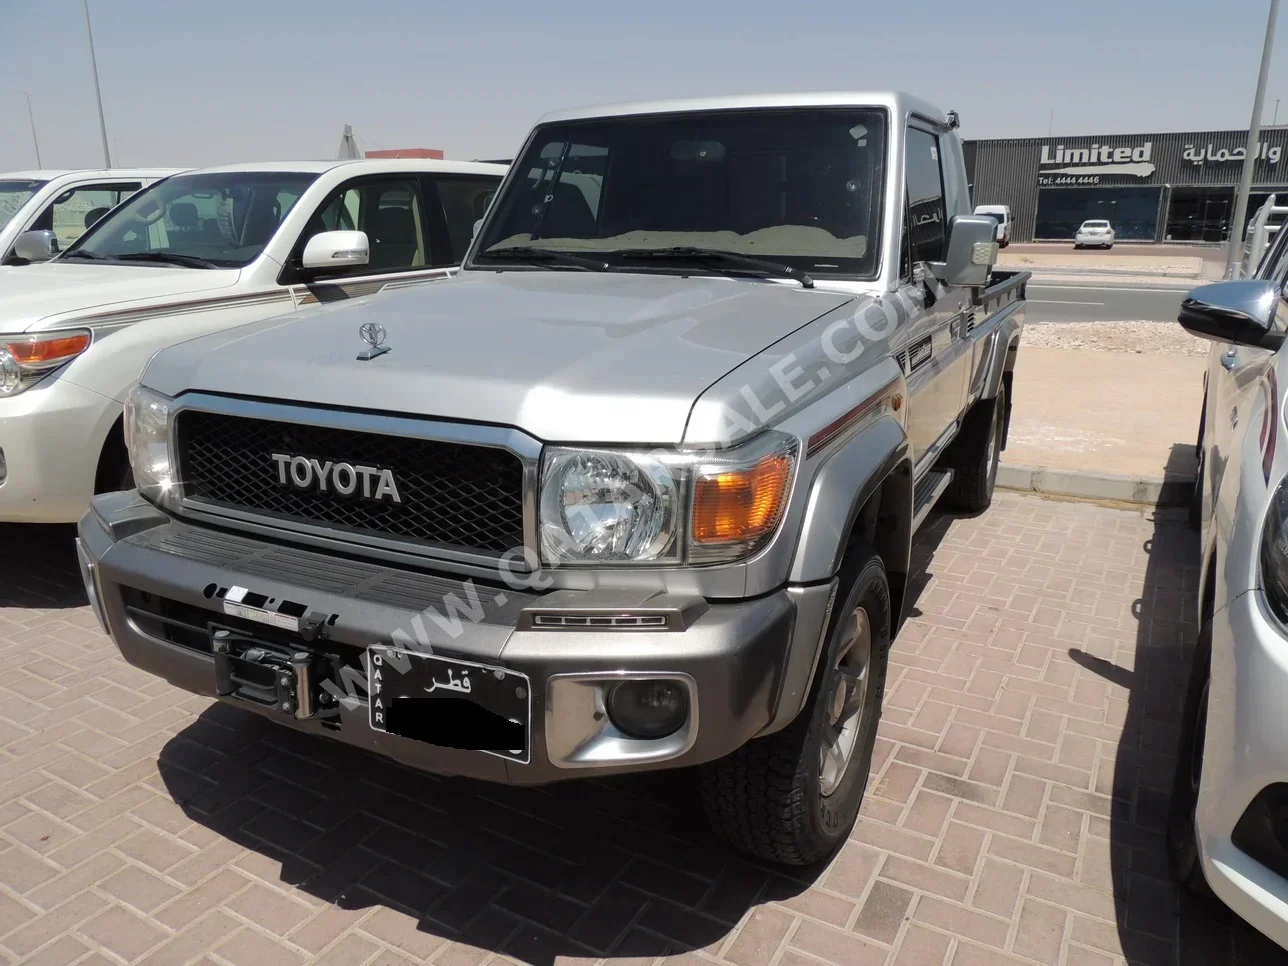 Toyota  Land Cruiser  LX  2022  Manual  47,000 Km  6 Cylinder  Four Wheel Drive (4WD)  Pick Up  Silver